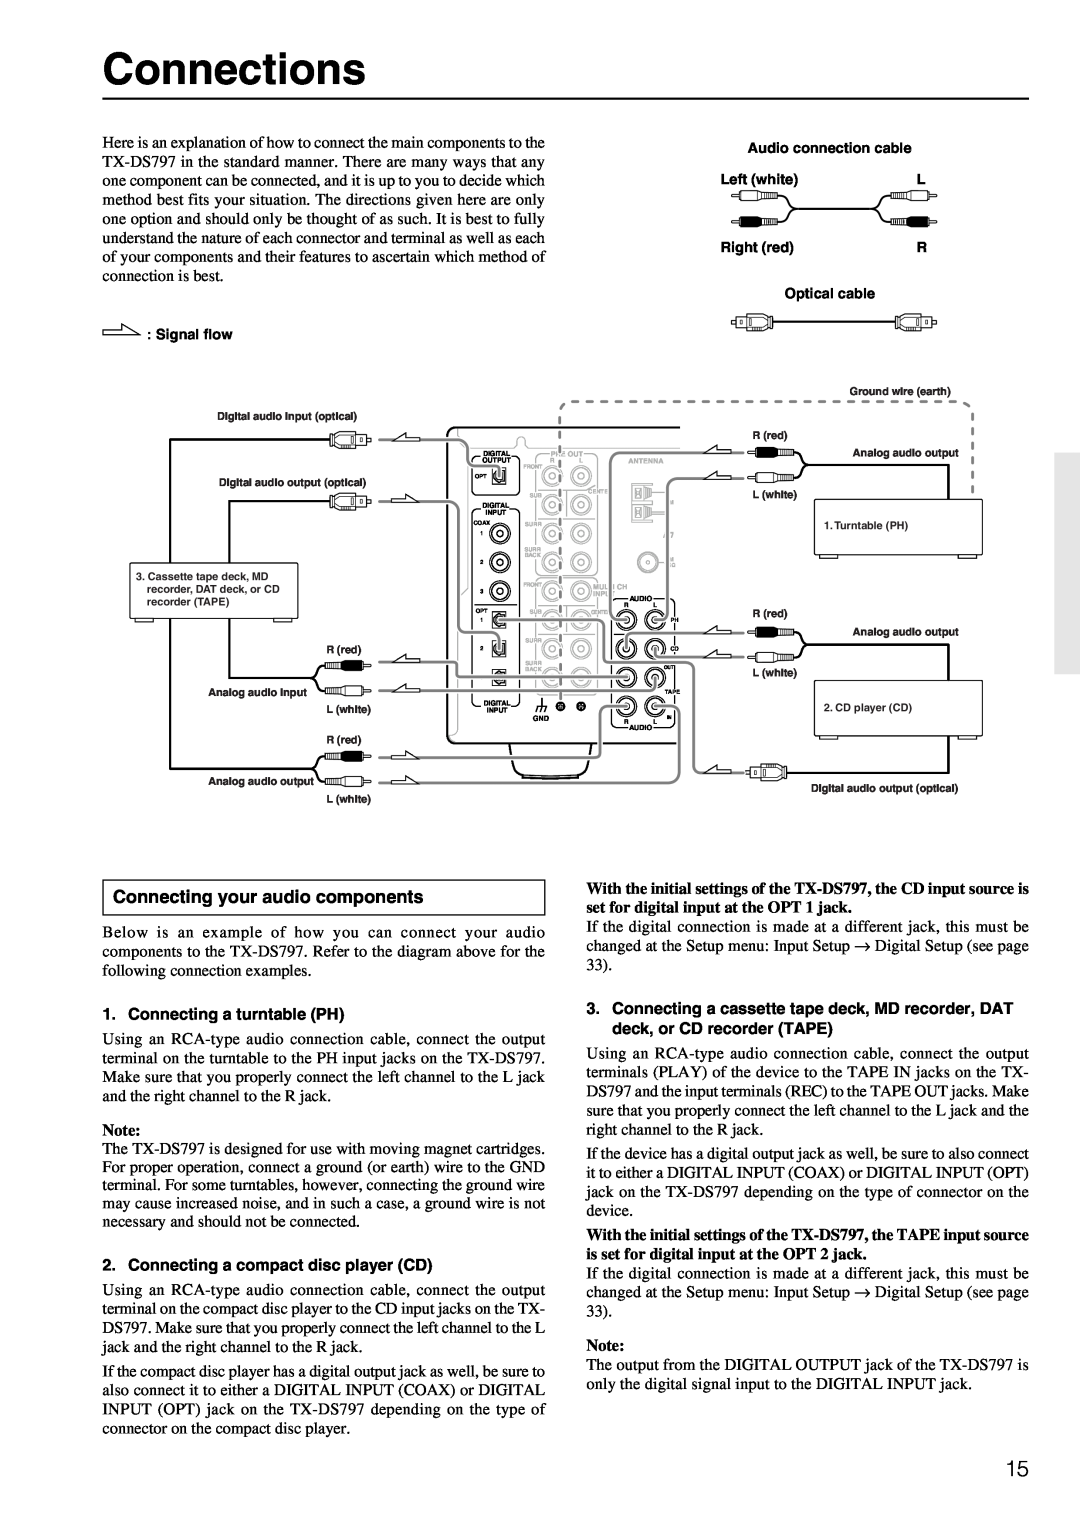 Onkyo TX-DS797 instruction manual Connections, Connecting your audio components 